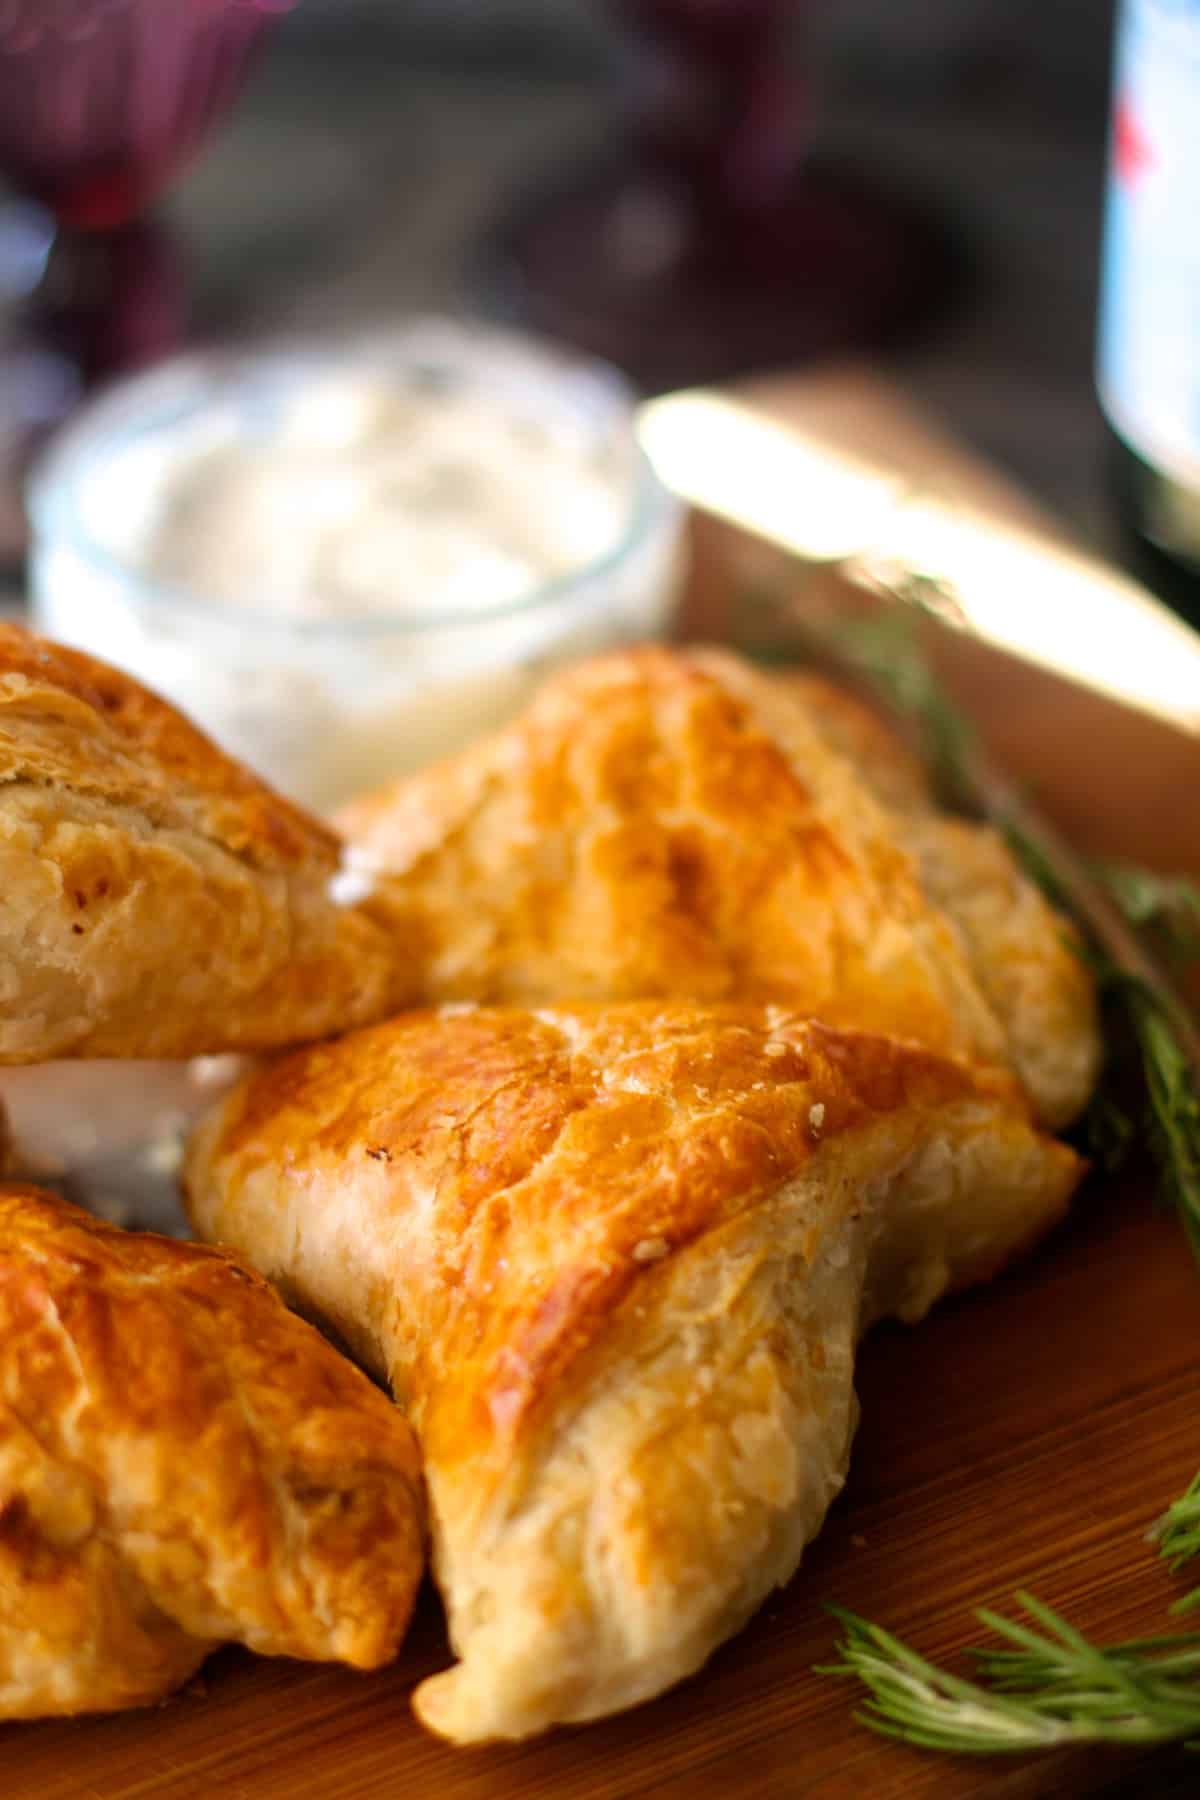 Lamb and mushroom puff pastry triangles with rosemary garlic dipping sauce